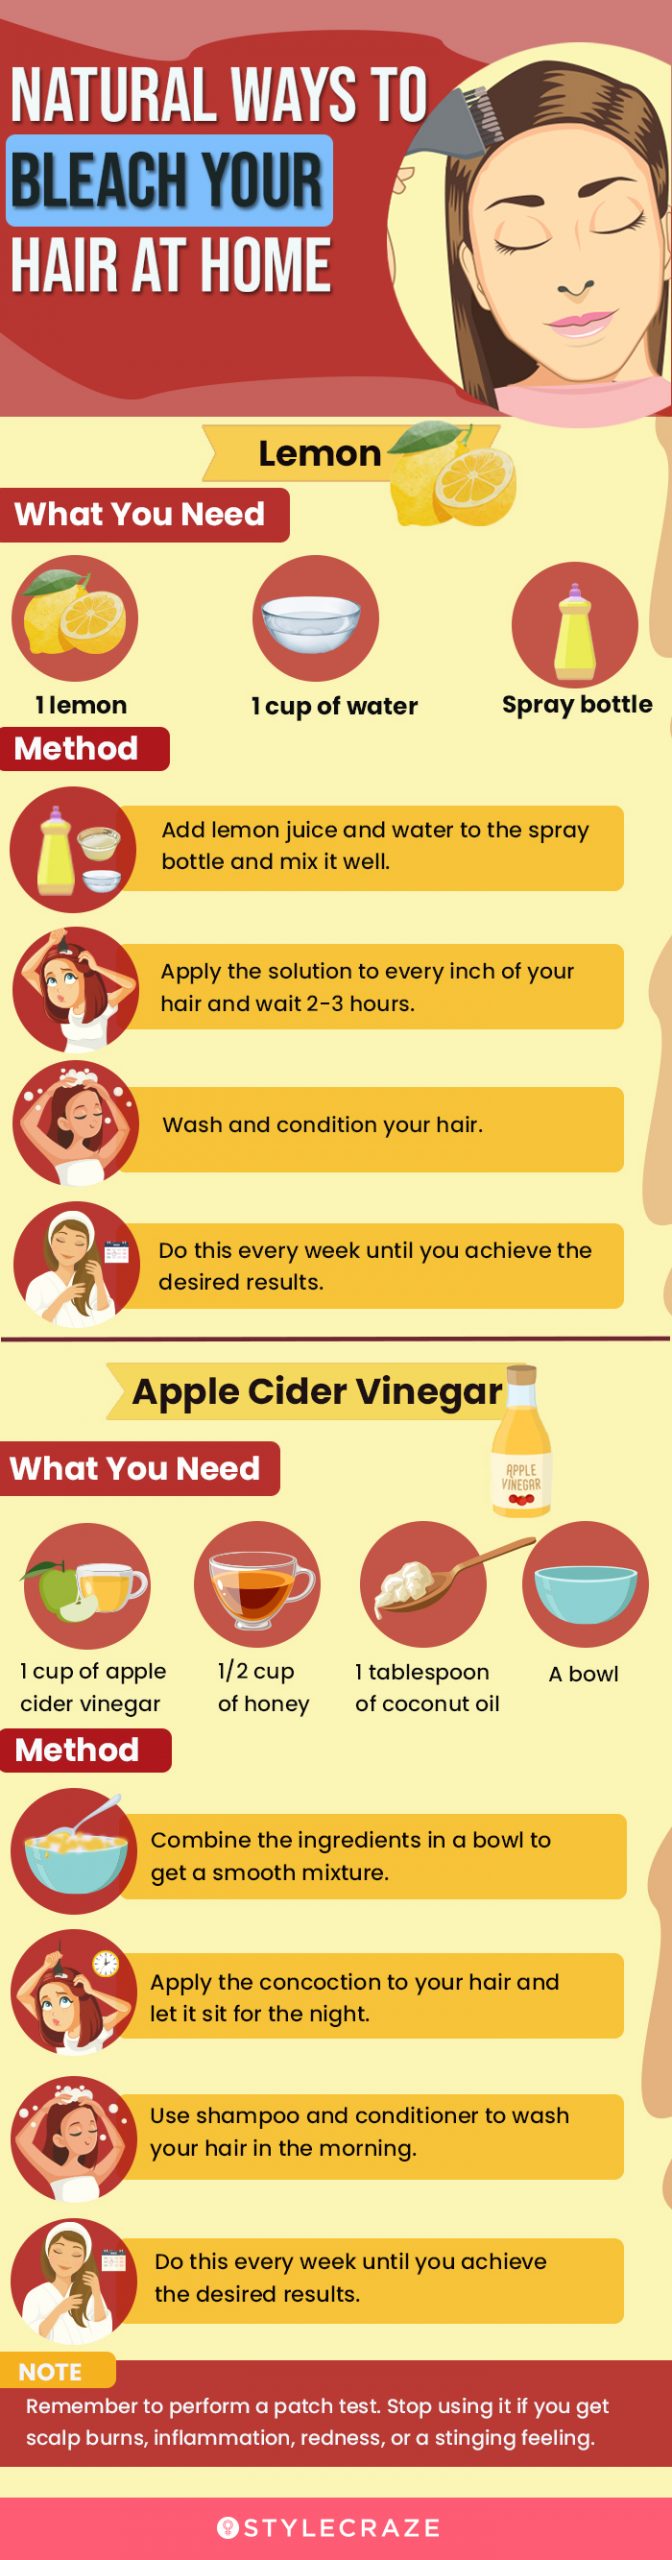 natural ways to bleach your hair at home (infographic)